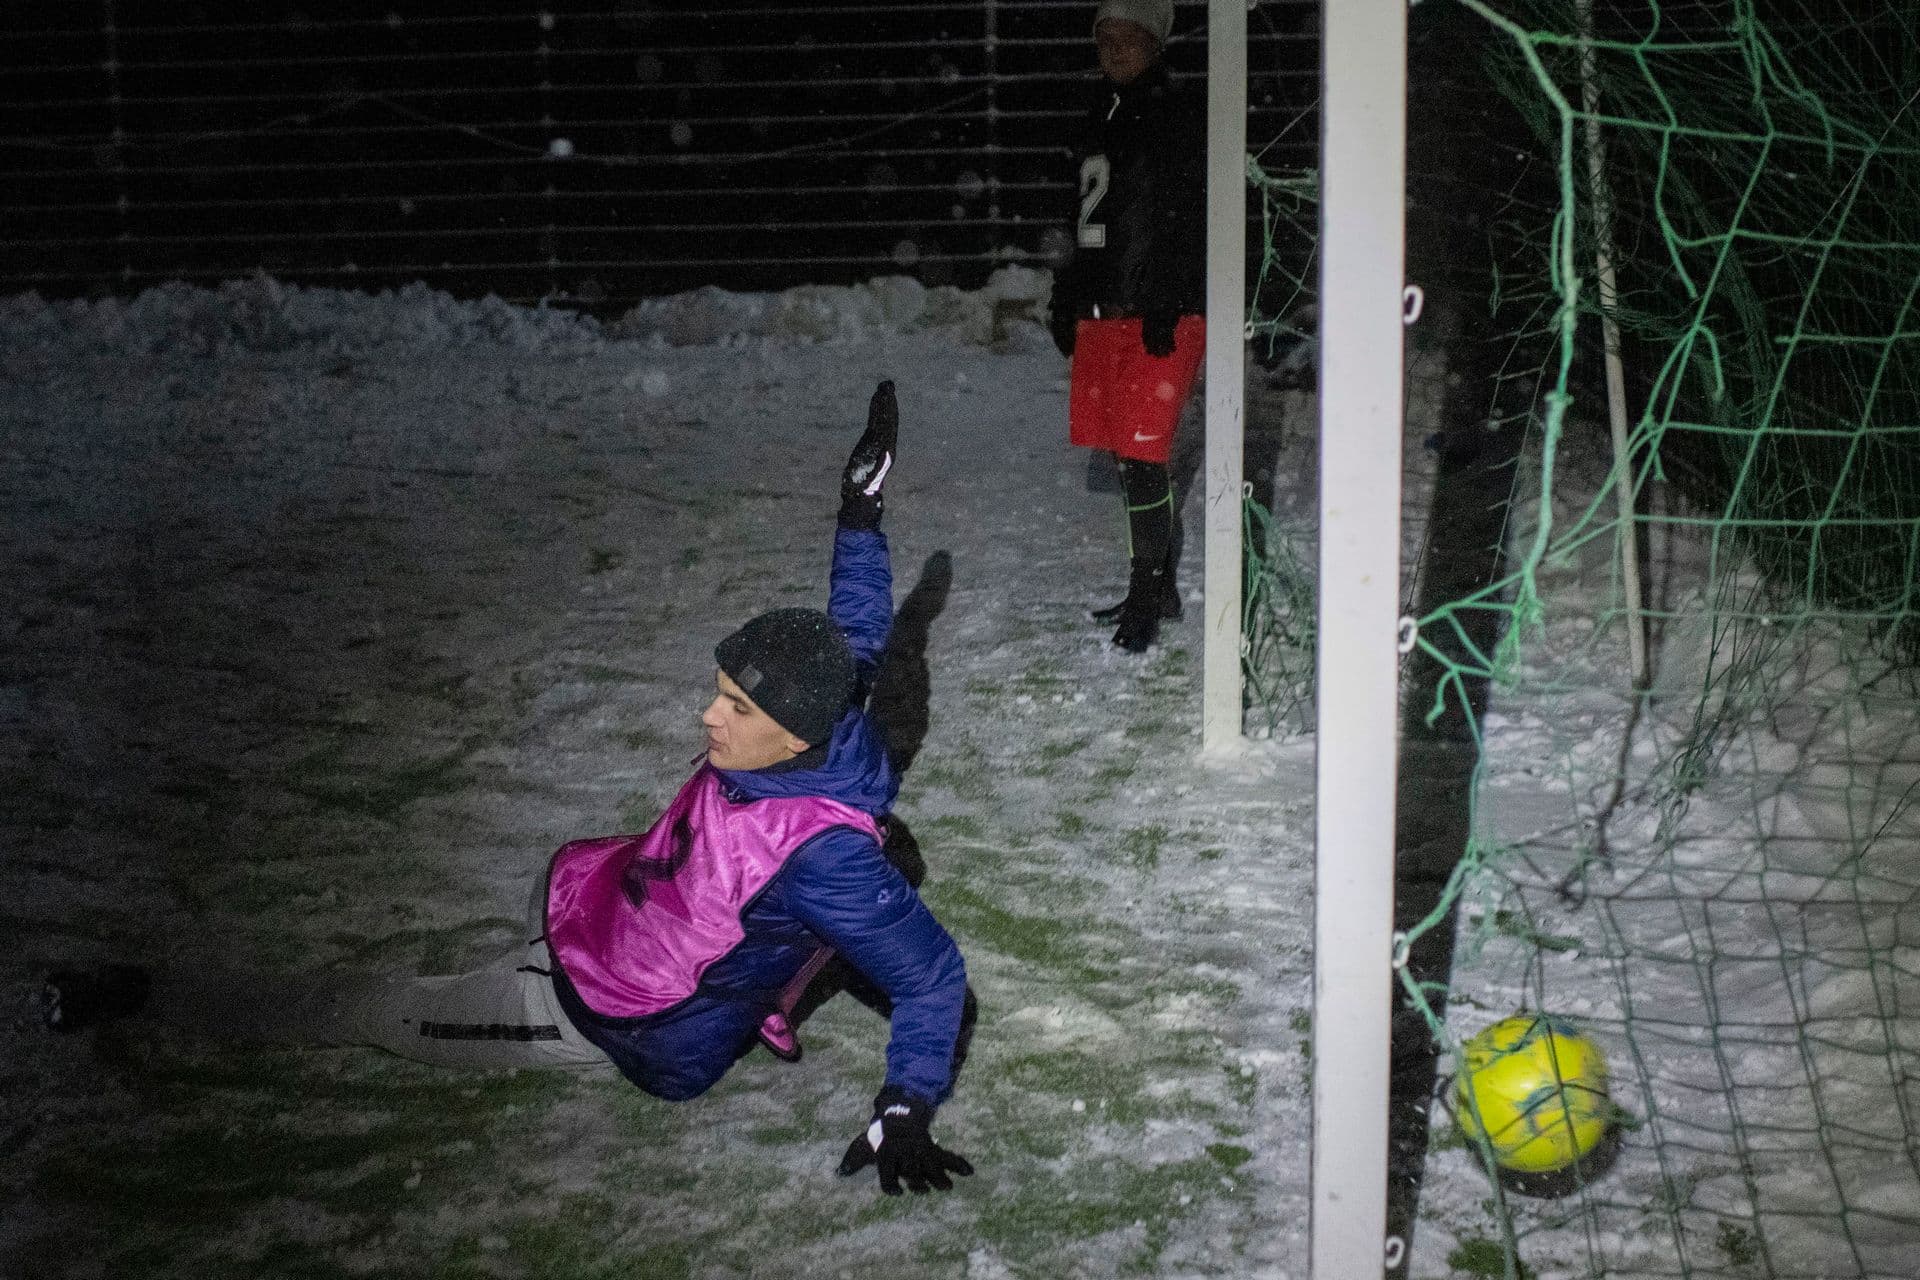 A goal is scored as people play in a soccer game during a blackout in Irpin